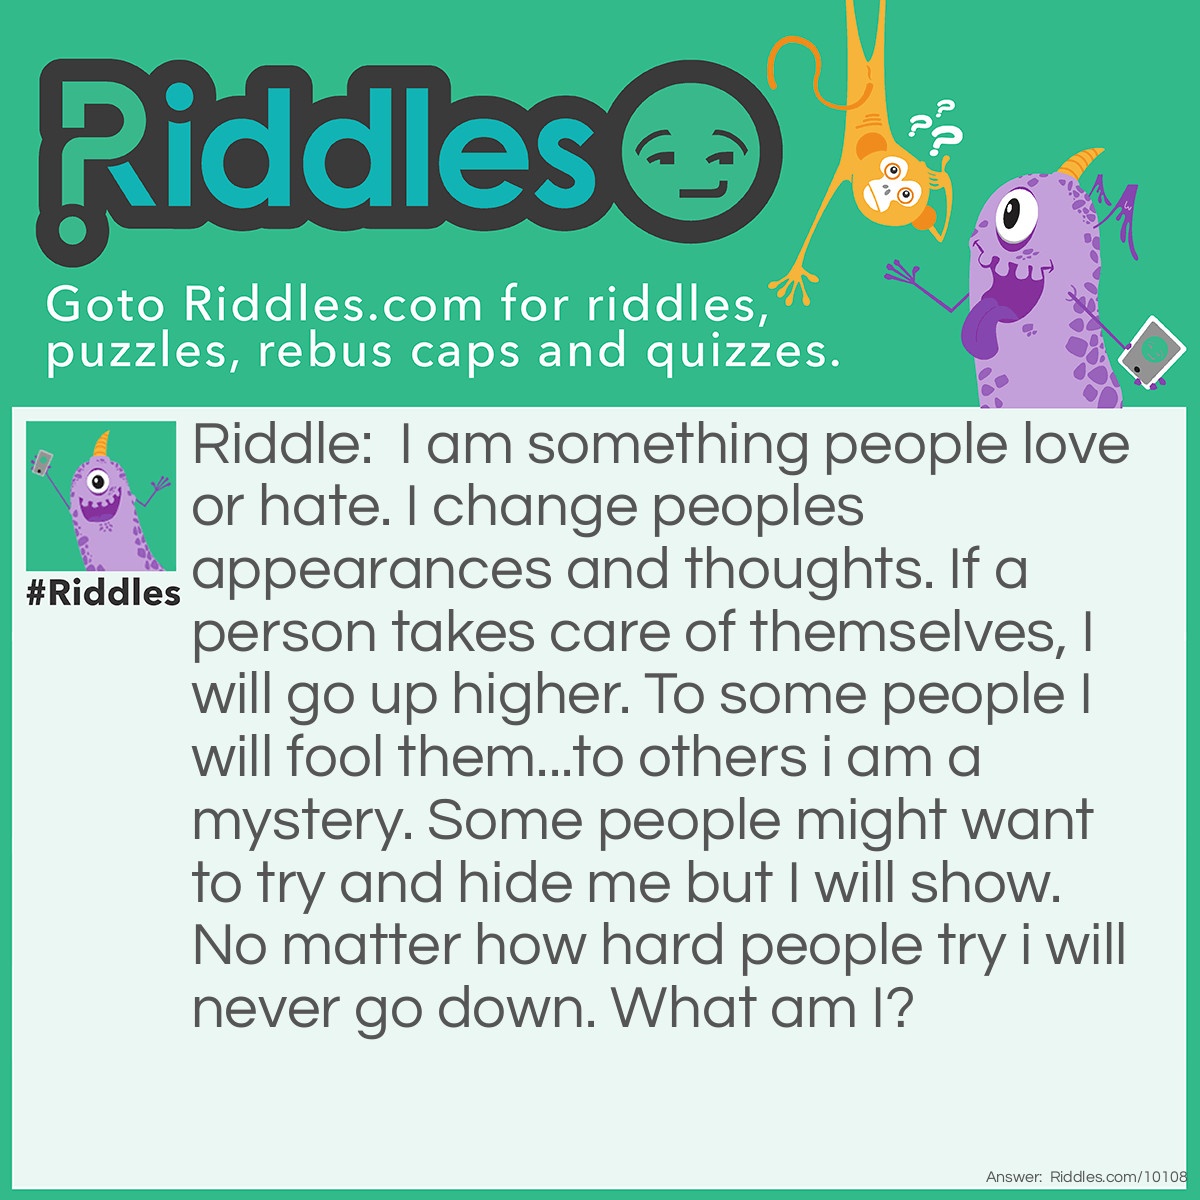 Riddle: I am something people love or hate. I change peoples appearances and thoughts. If a person takes care of themselves, I will go up higher. To some people I will fool them...to others i am a mystery. Some people might want to try and hide me but I will show. No matter how hard people try i will never go down. What am I? Answer: Age